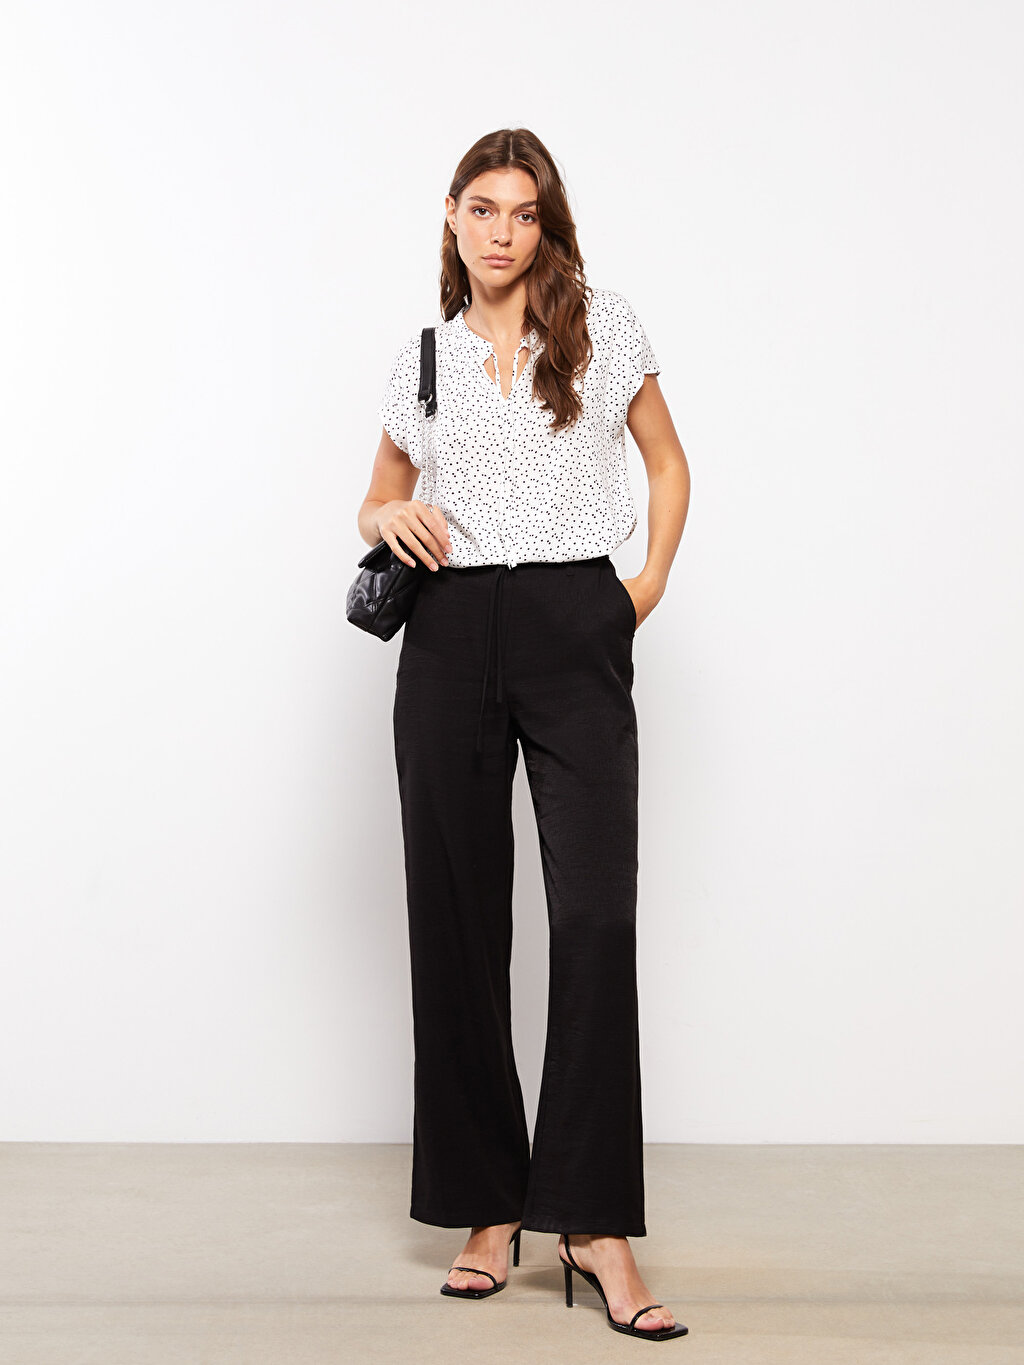 Relaxed Trousers Three Ways Outfit Ideas for Fall  Brooklyn Blonde  Trousers  women outfit Casual work outfits Casual chic outfit